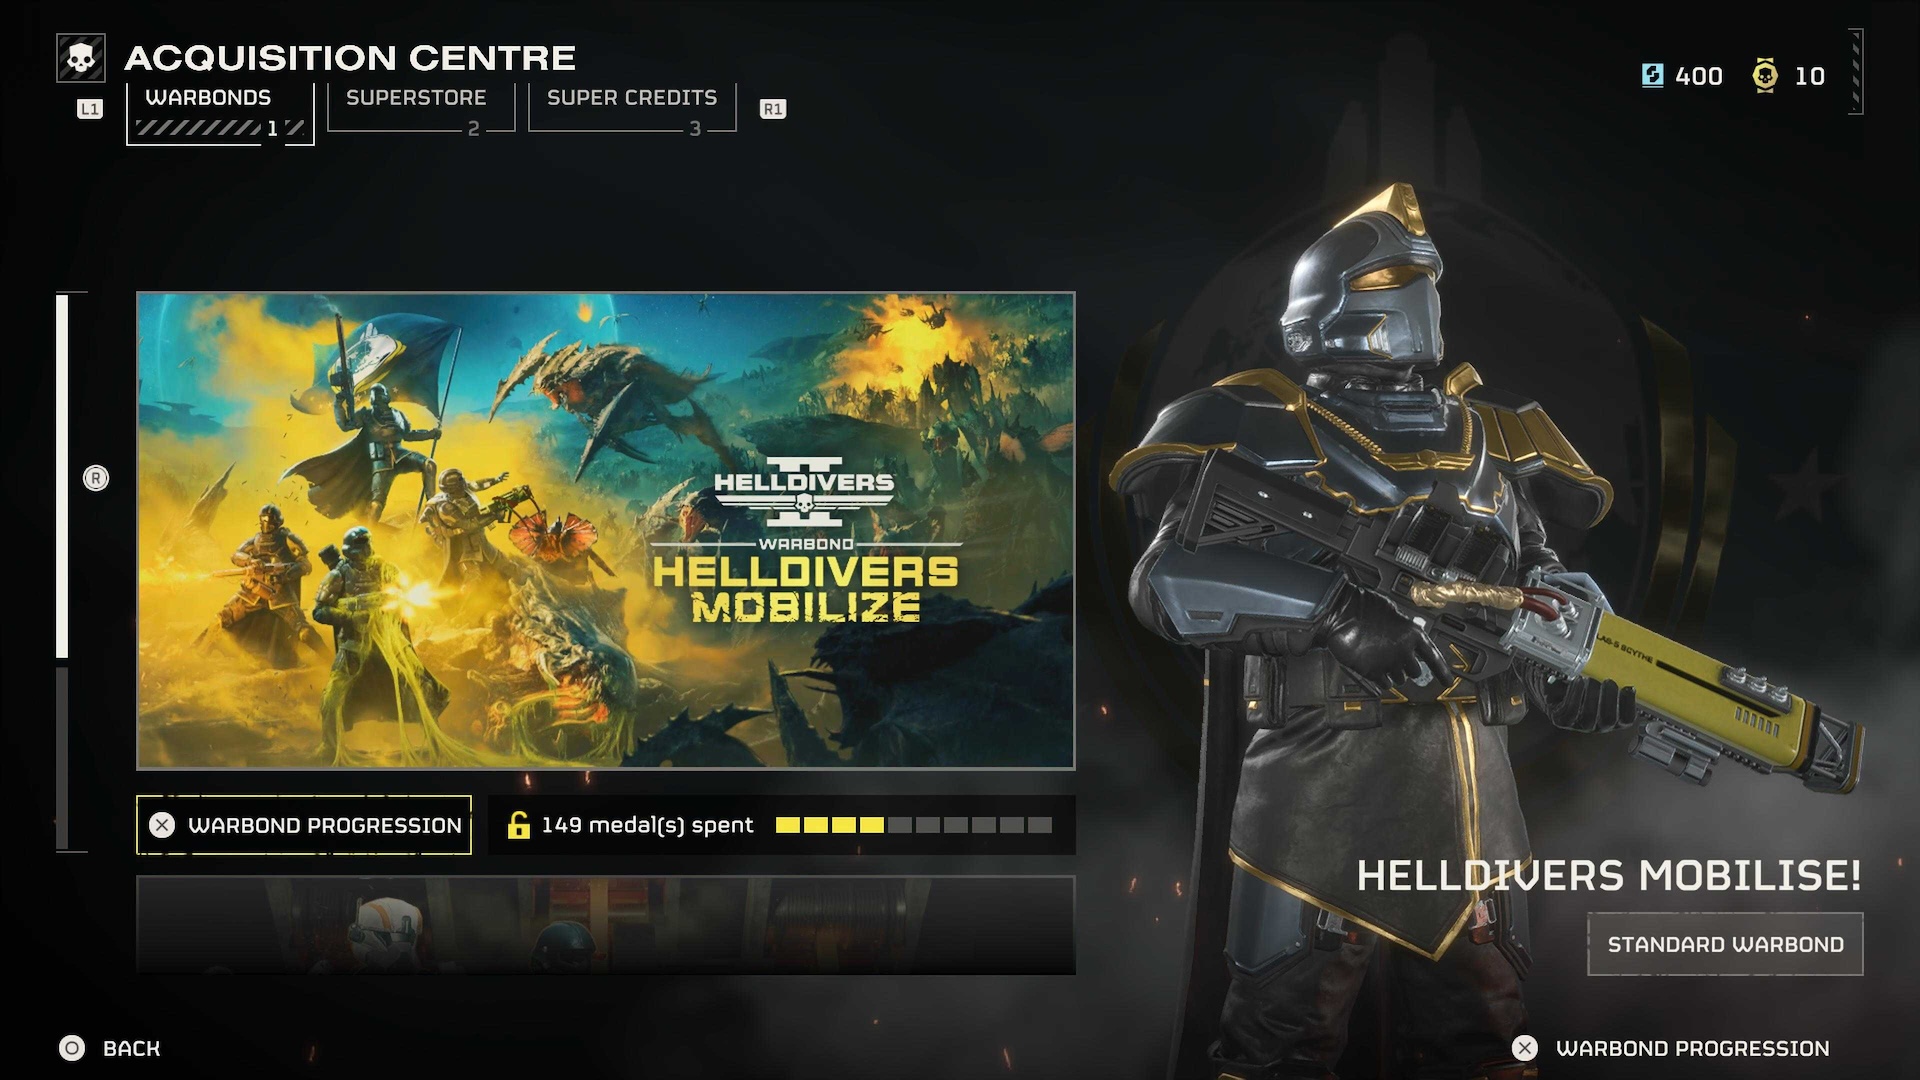 The Acquisitions Center menu in Helldivers 2